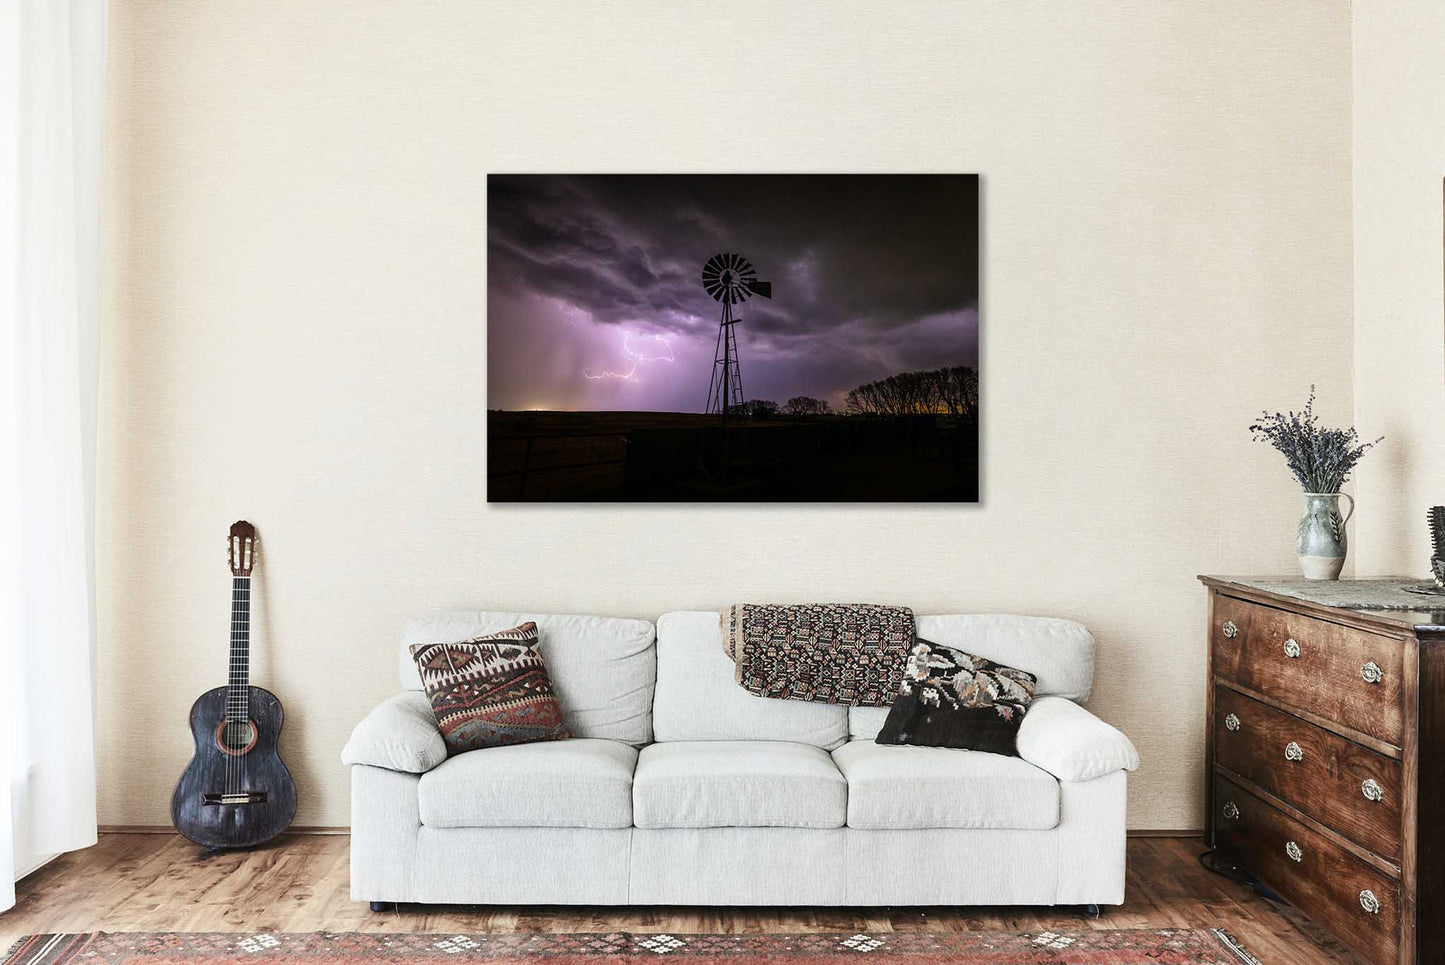 Country Metal Print (Ready to Hang) Photo of Old Windmill and Lightning on Stormy Night in Oklahoma Storm Wall Art Farmhouse Decor